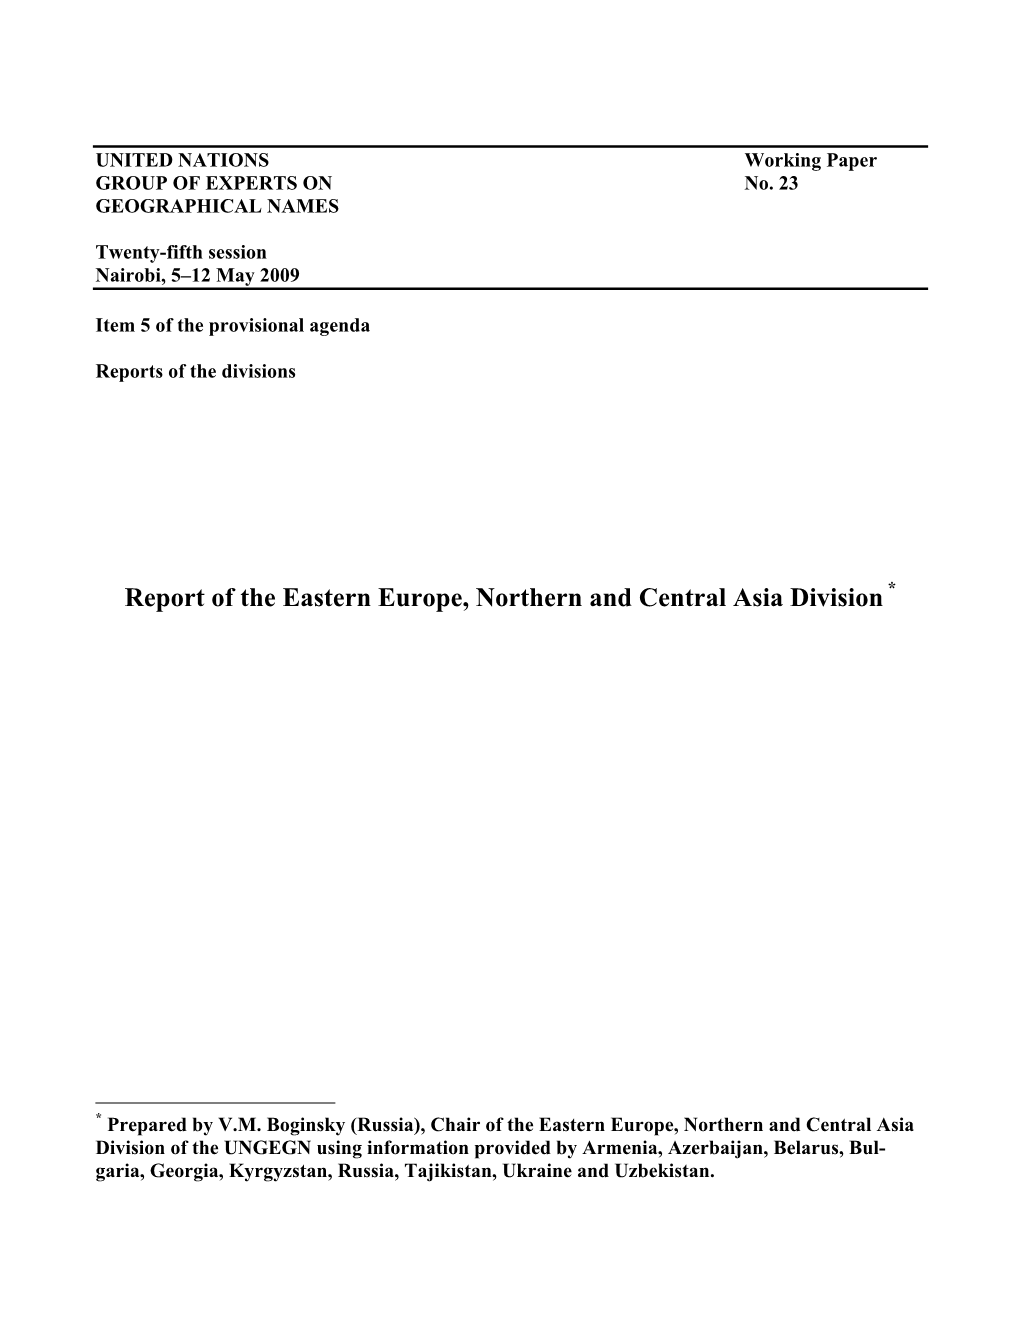 Report of the Eastern Europe, Northern and Central Asia Division *